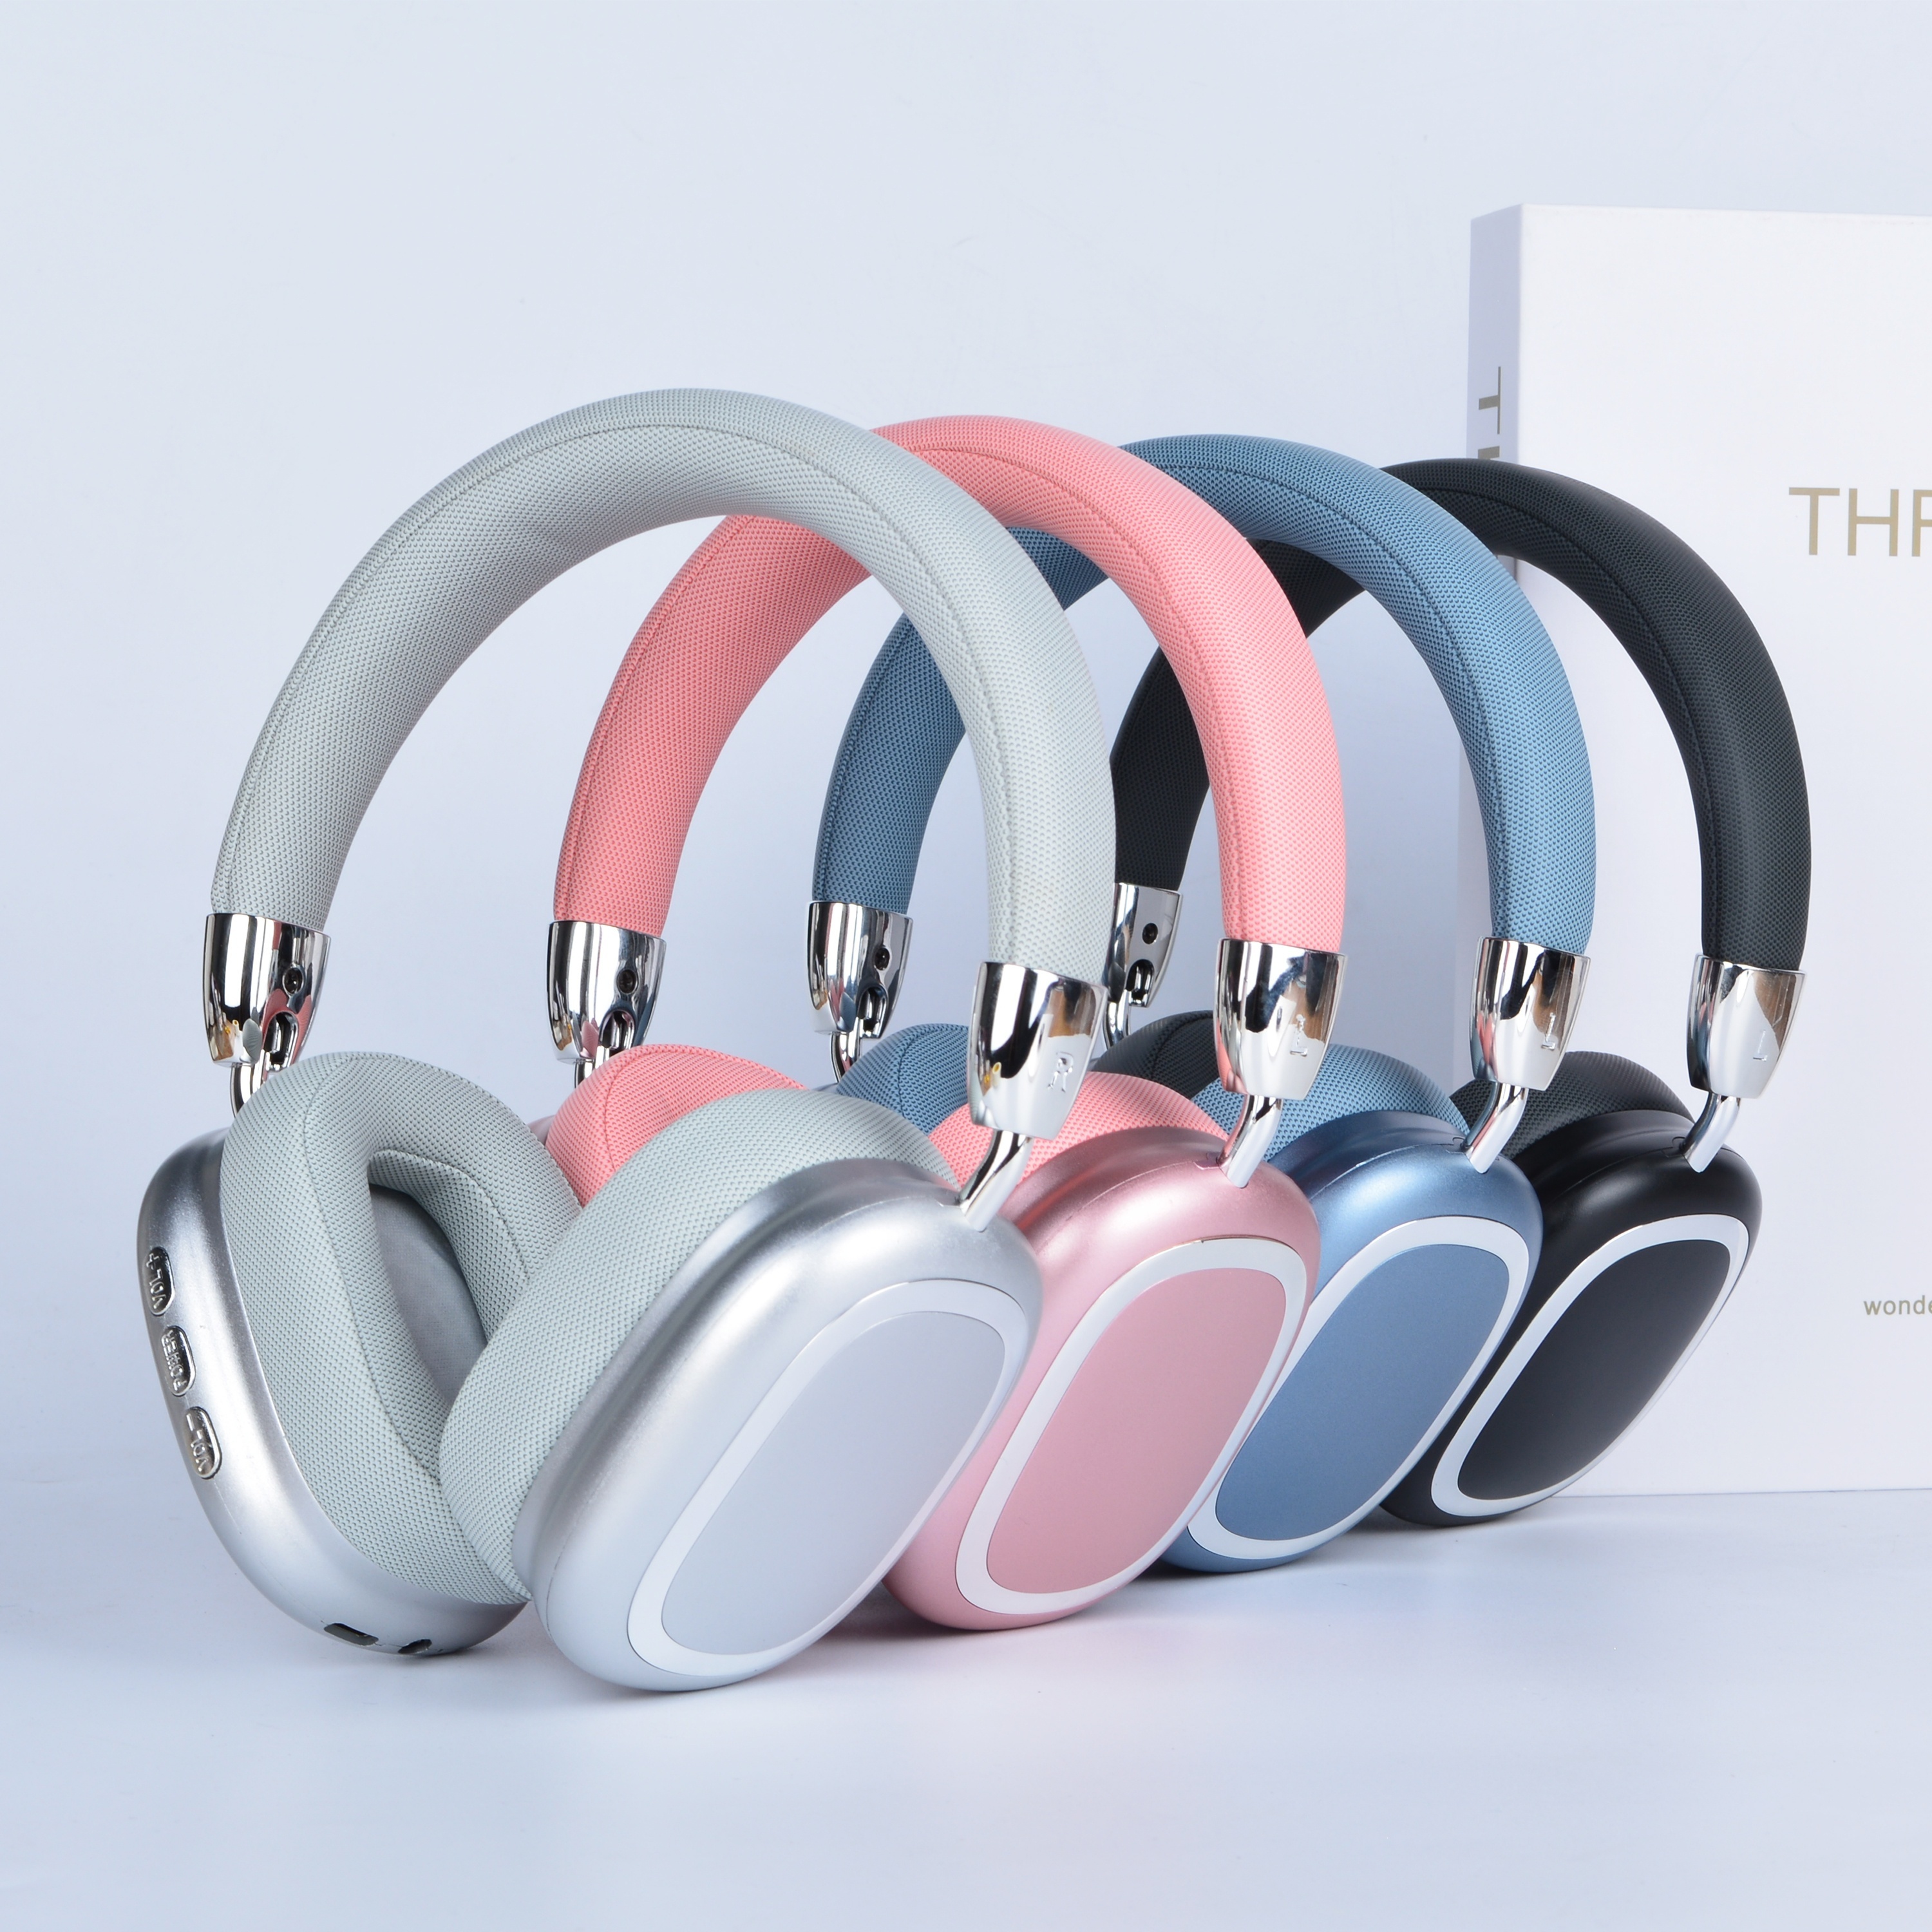 

30-hour Playtime Wireless Headphones Pro - Rich Bass, Crystal-clear Calls, Active Noise Cancellation, Comfort Fit, Detachable Cable, Volume Control, , Rechargeable Lithium Battery